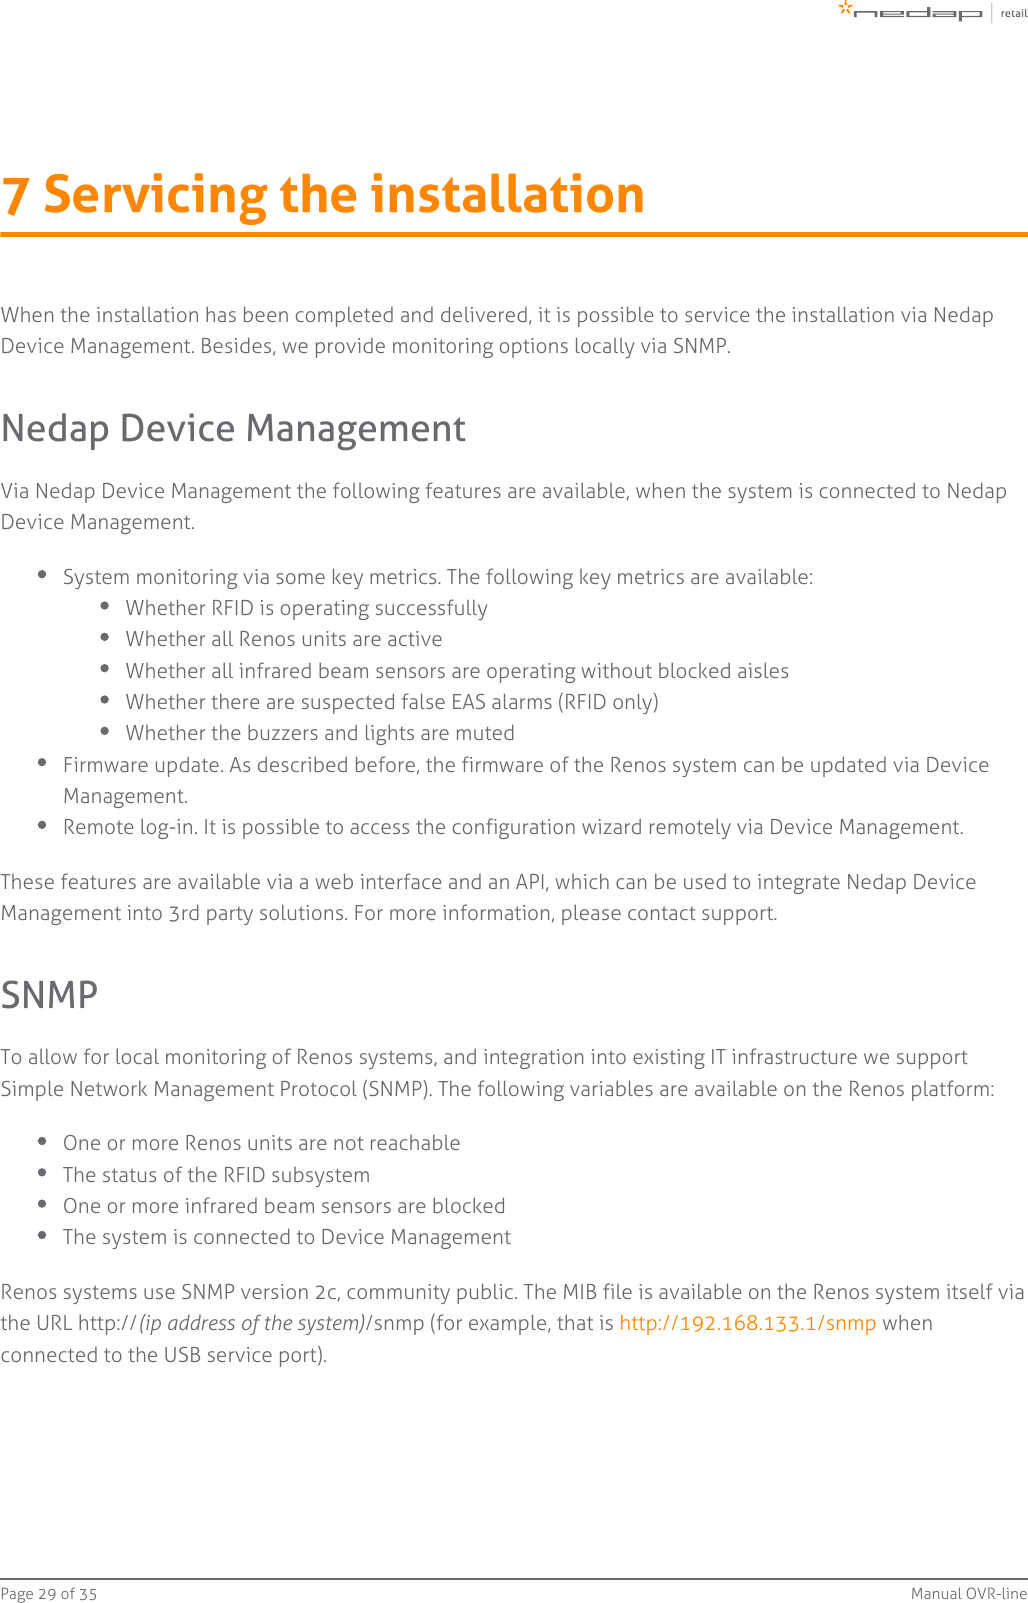 Page   of 29 35 Manual OVR-line7 Servicing the installationWhen the installation has been completed and delivered, it is possible to service the installation via NedapDevice Management. Besides, we provide monitoring options locally via SNMP.Nedap Device ManagementVia Nedap Device Management the following features are available, when the system is connected to NedapDevice Management.System monitoring via some key metrics. The following key metrics are available:Whether RFID is operating successfullyWhether all Renos units are activeWhether all infrared beam sensors are operating without blocked aislesWhether there are suspected false EAS alarms (RFID only)Whether the buzzers and lights are mutedFirmware update. As described before, the firmware of the Renos system can be updated via DeviceManagement.Remote log-in. It is possible to access the configuration wizard remotely via Device Management.These features are available via a web interface and an API, which can be used to integrate Nedap DeviceManagement into 3rd party solutions. For more information, please contact support.SNMPTo allow for local monitoring of Renos systems, and integration into existing IT infrastructure we supportSimple Network Management Protocol (SNMP). The following variables are available on the Renos platform:One or more Renos units are not reachableThe status of the RFID subsystemOne or more infrared beam sensors are blockedThe system is connected to Device ManagementRenos systems use SNMP version 2c, community public. The MIB file is available on the Renos system itself viathe URL http:// /snmp (for example, that is   when(ip address of the system) http://192.168.133.1/snmpconnected to the USB service port).